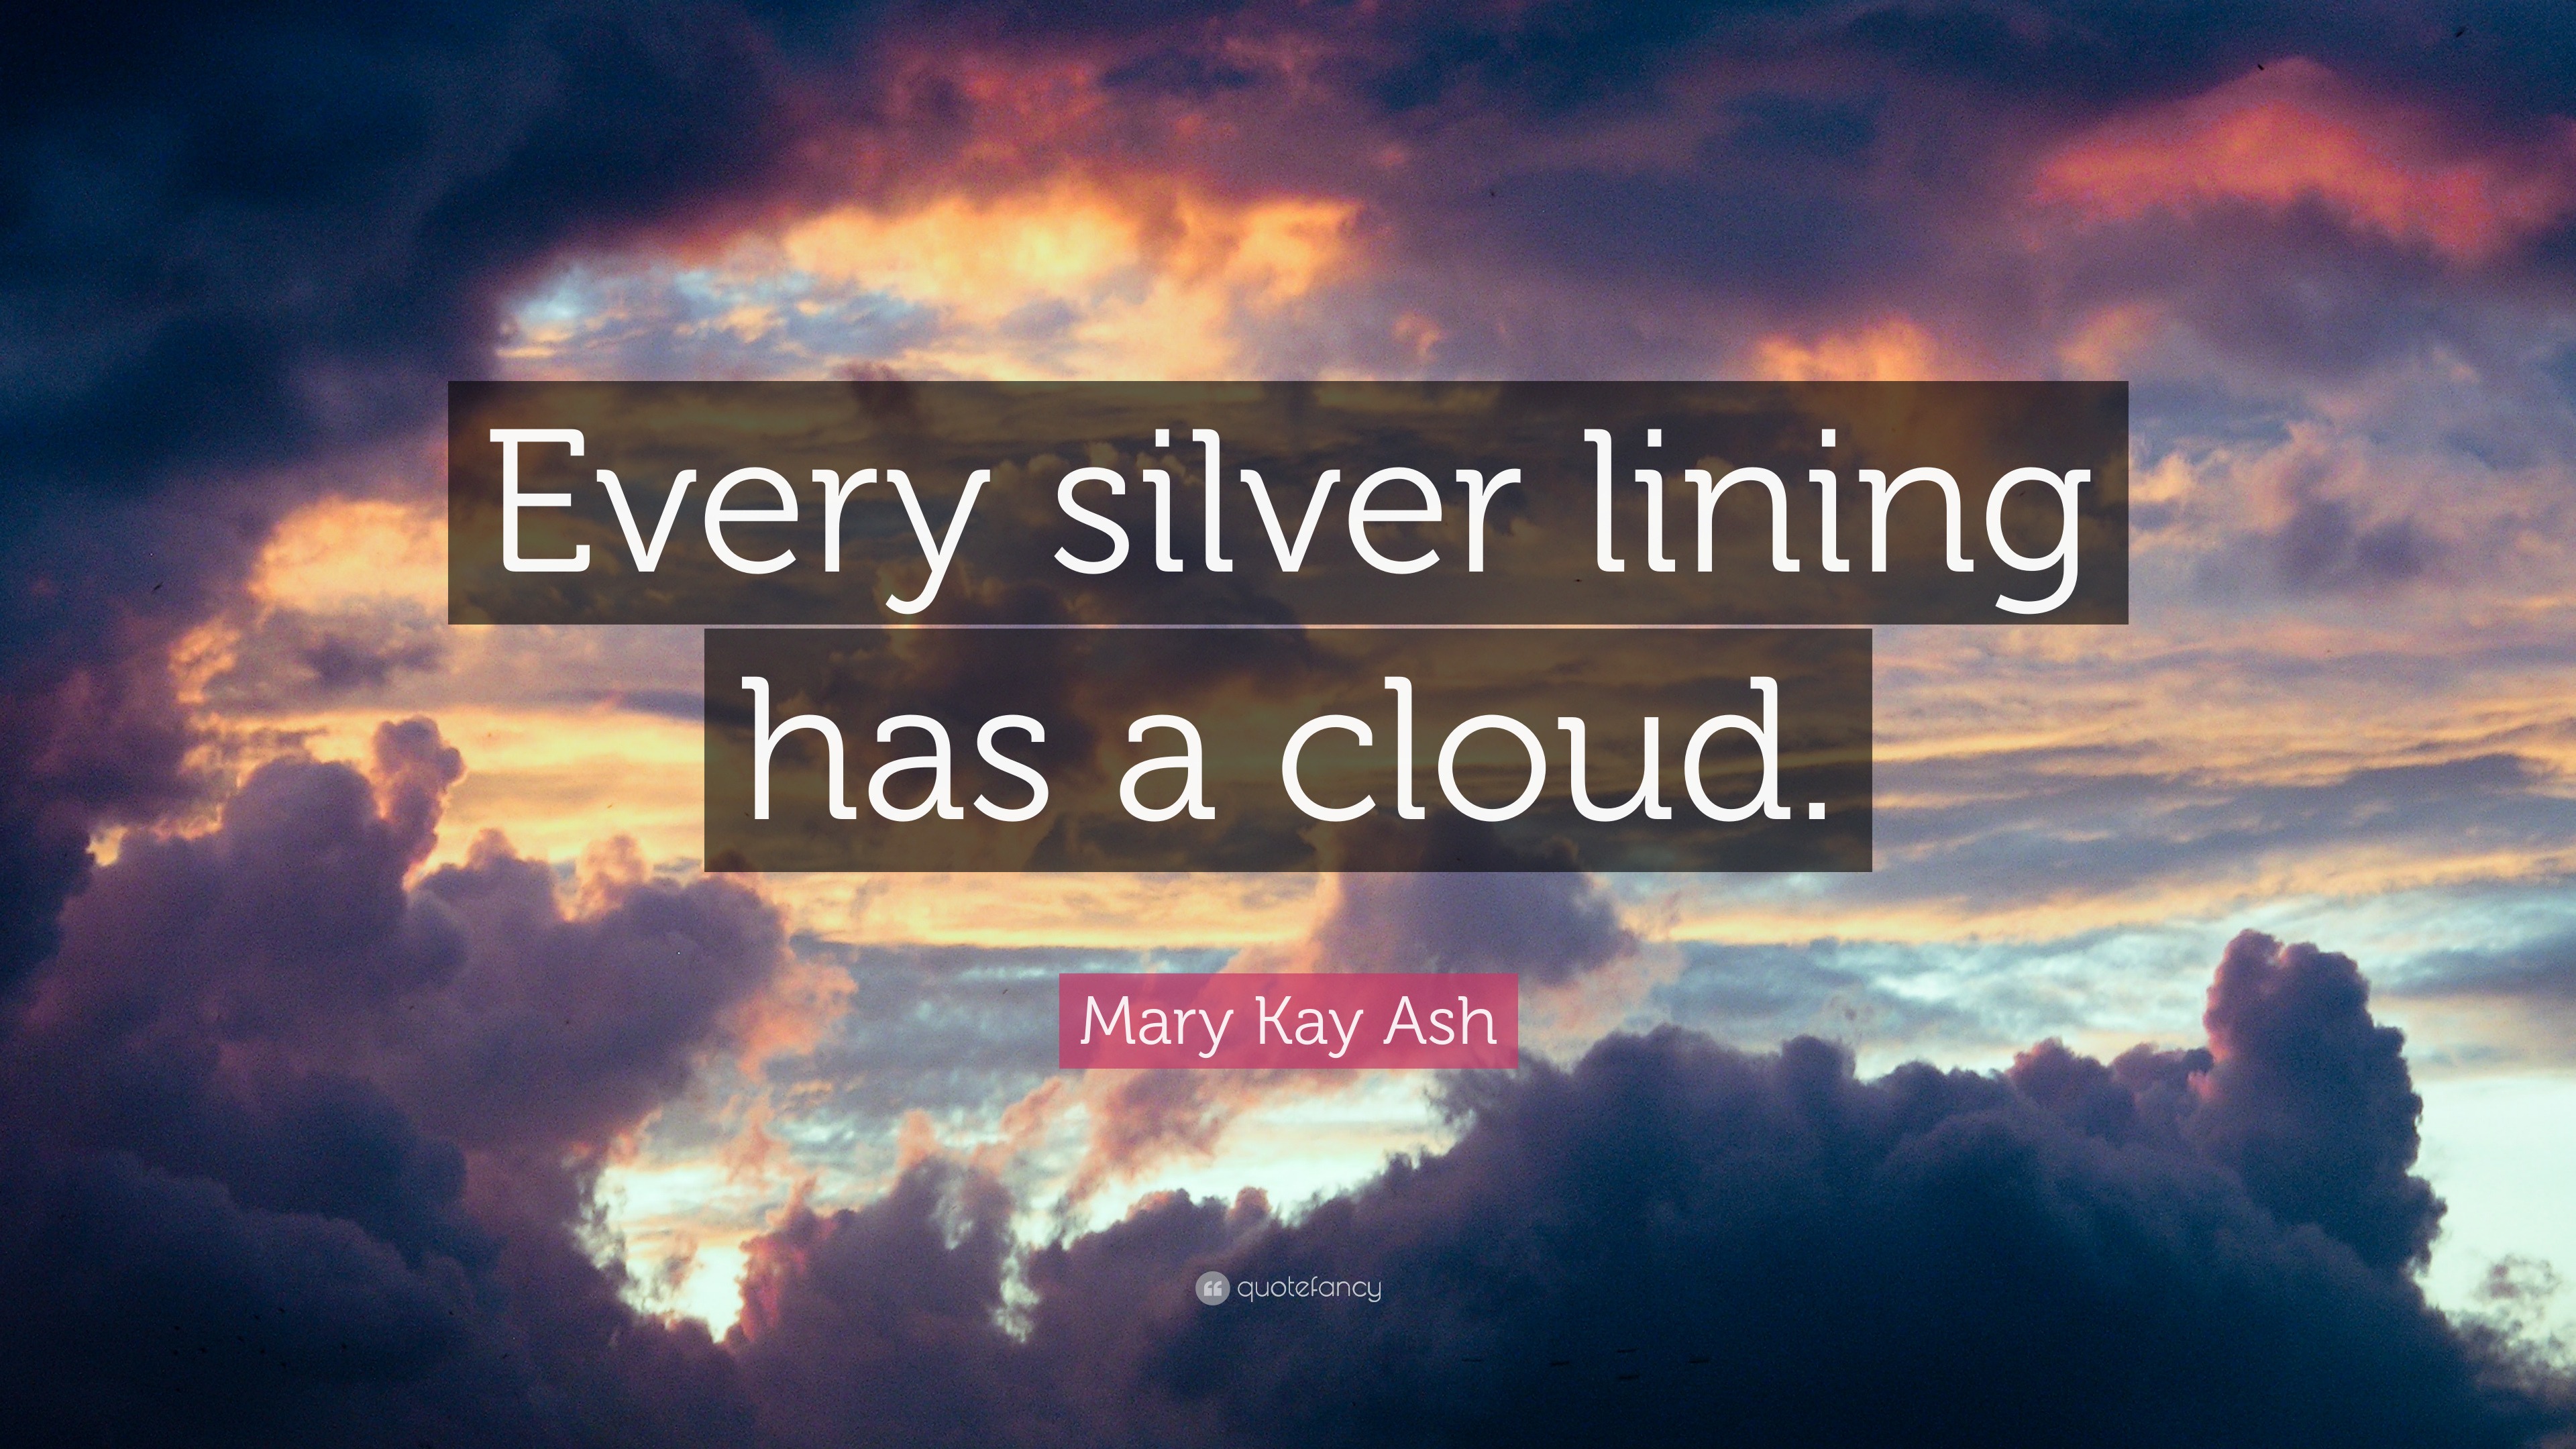 Every Cloud Has A Silver Lining